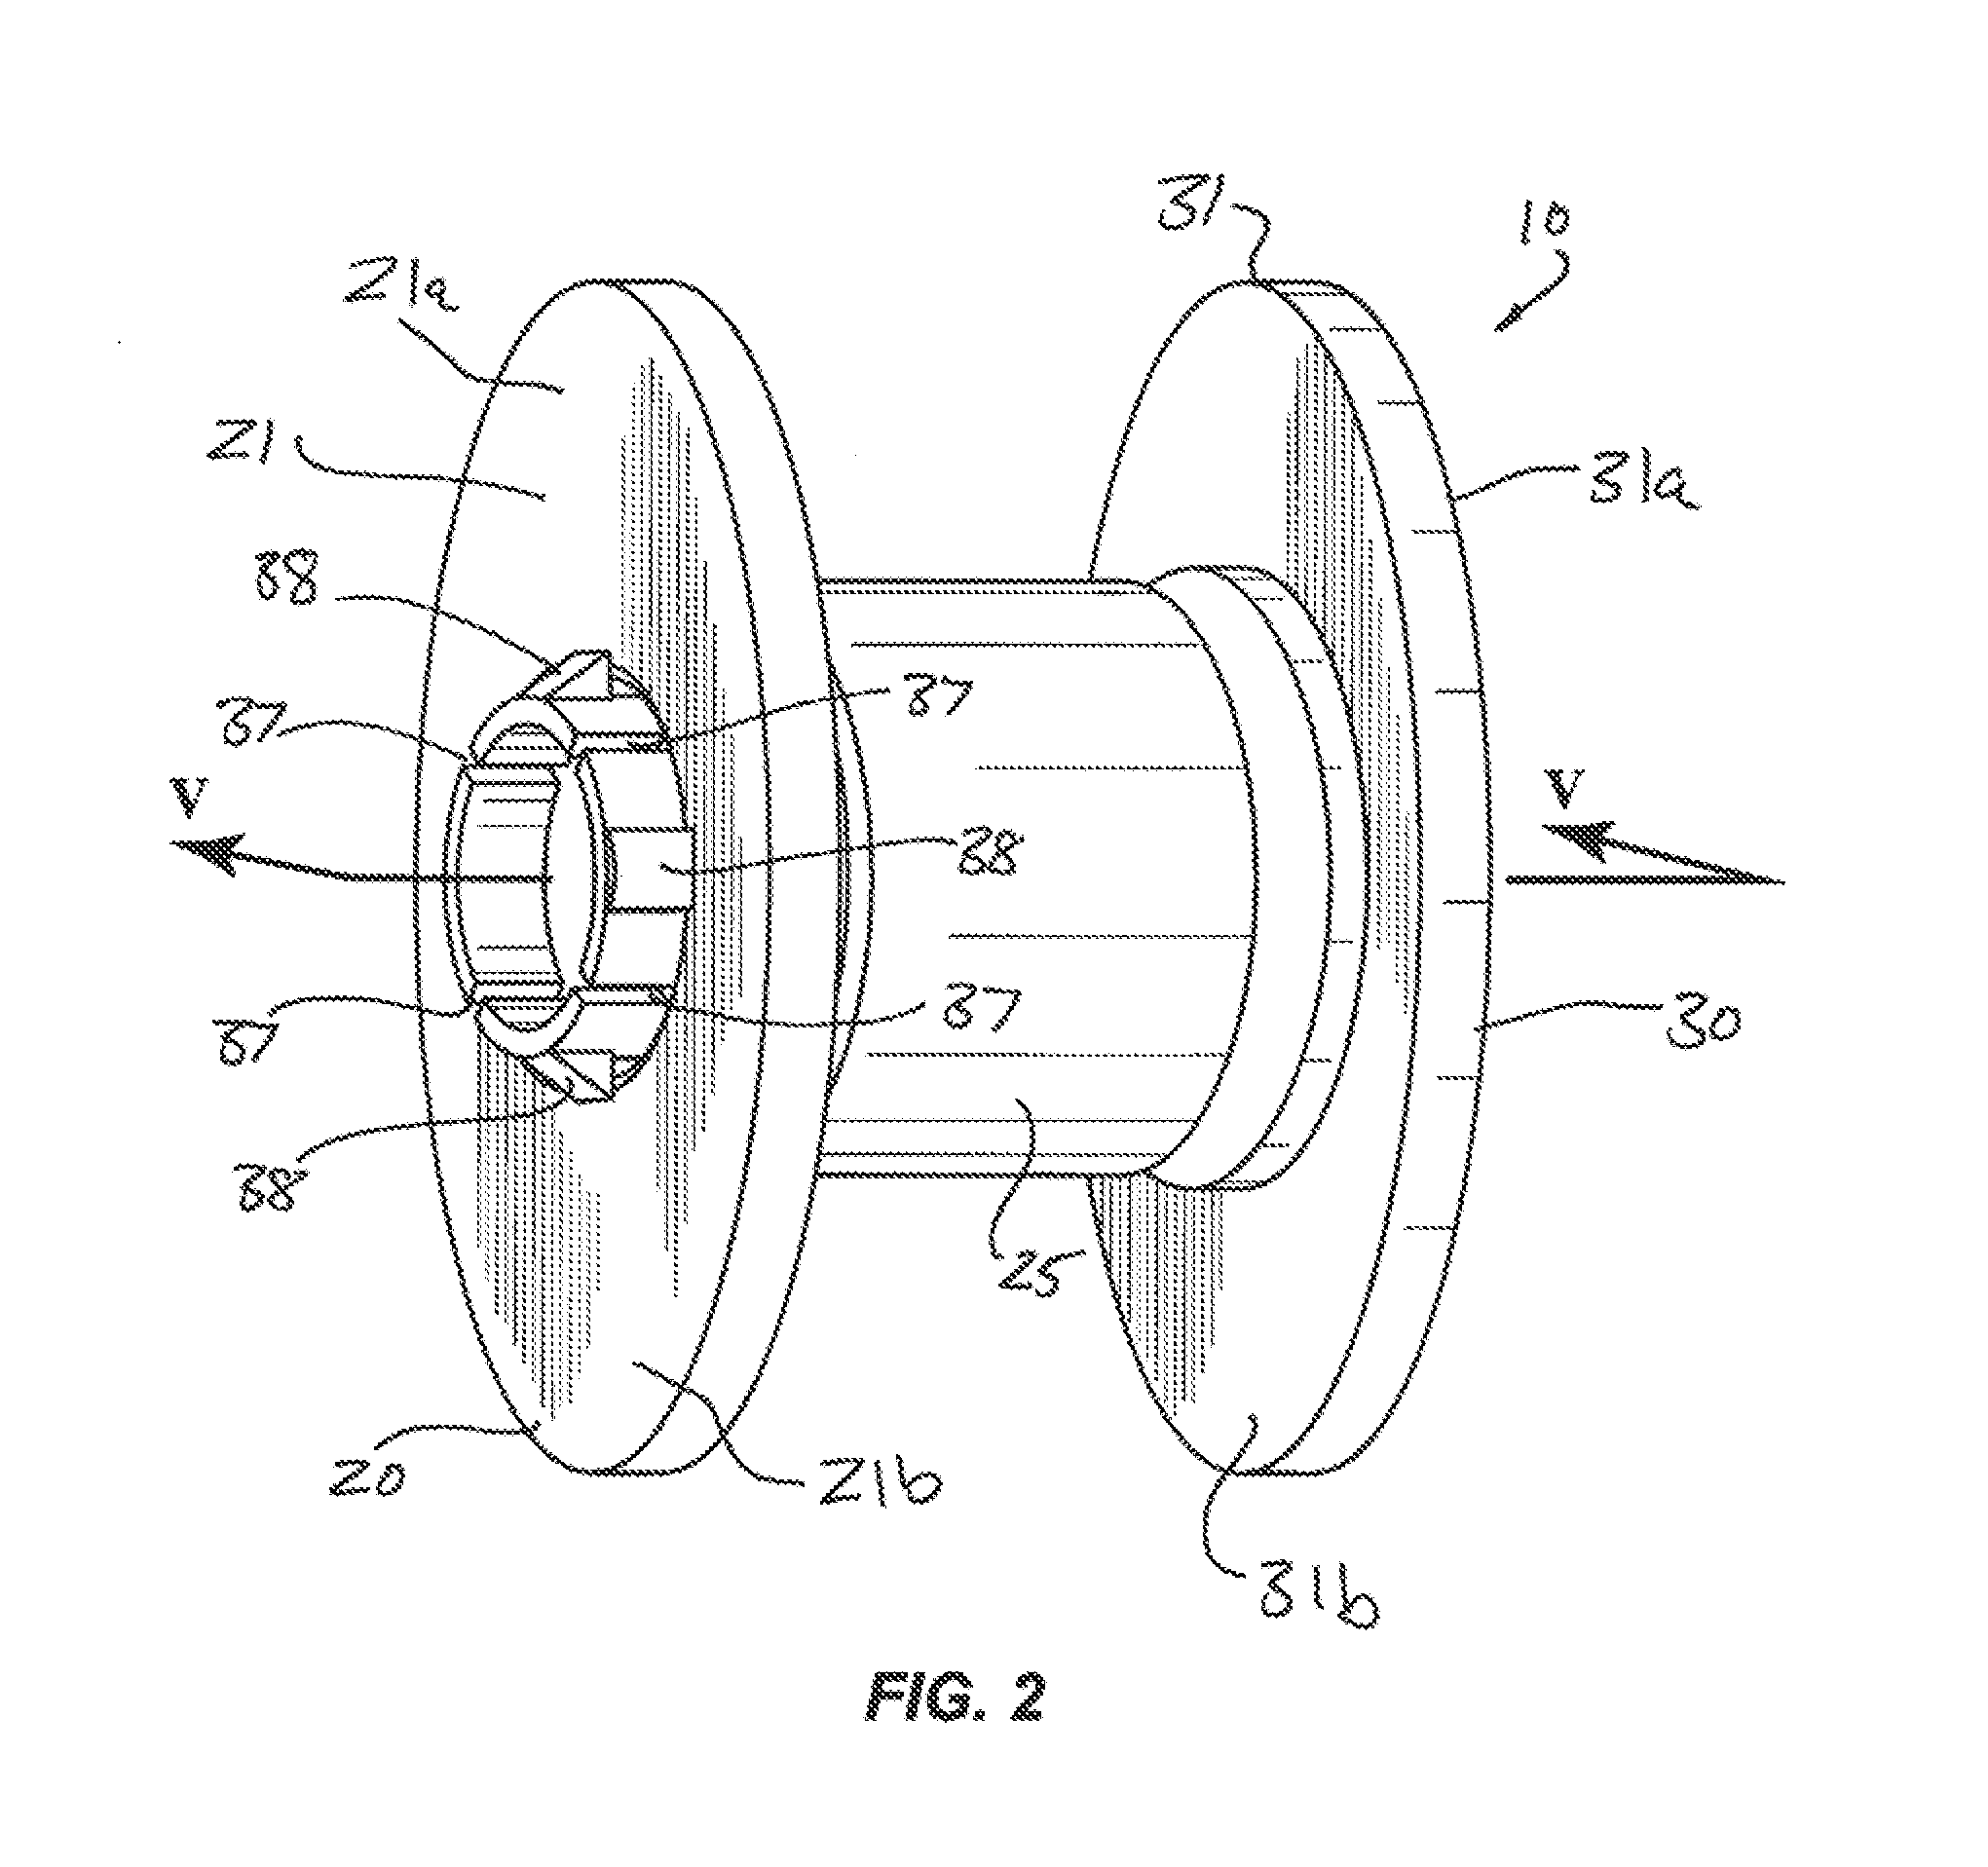 Interspinous process implant and method of implantation